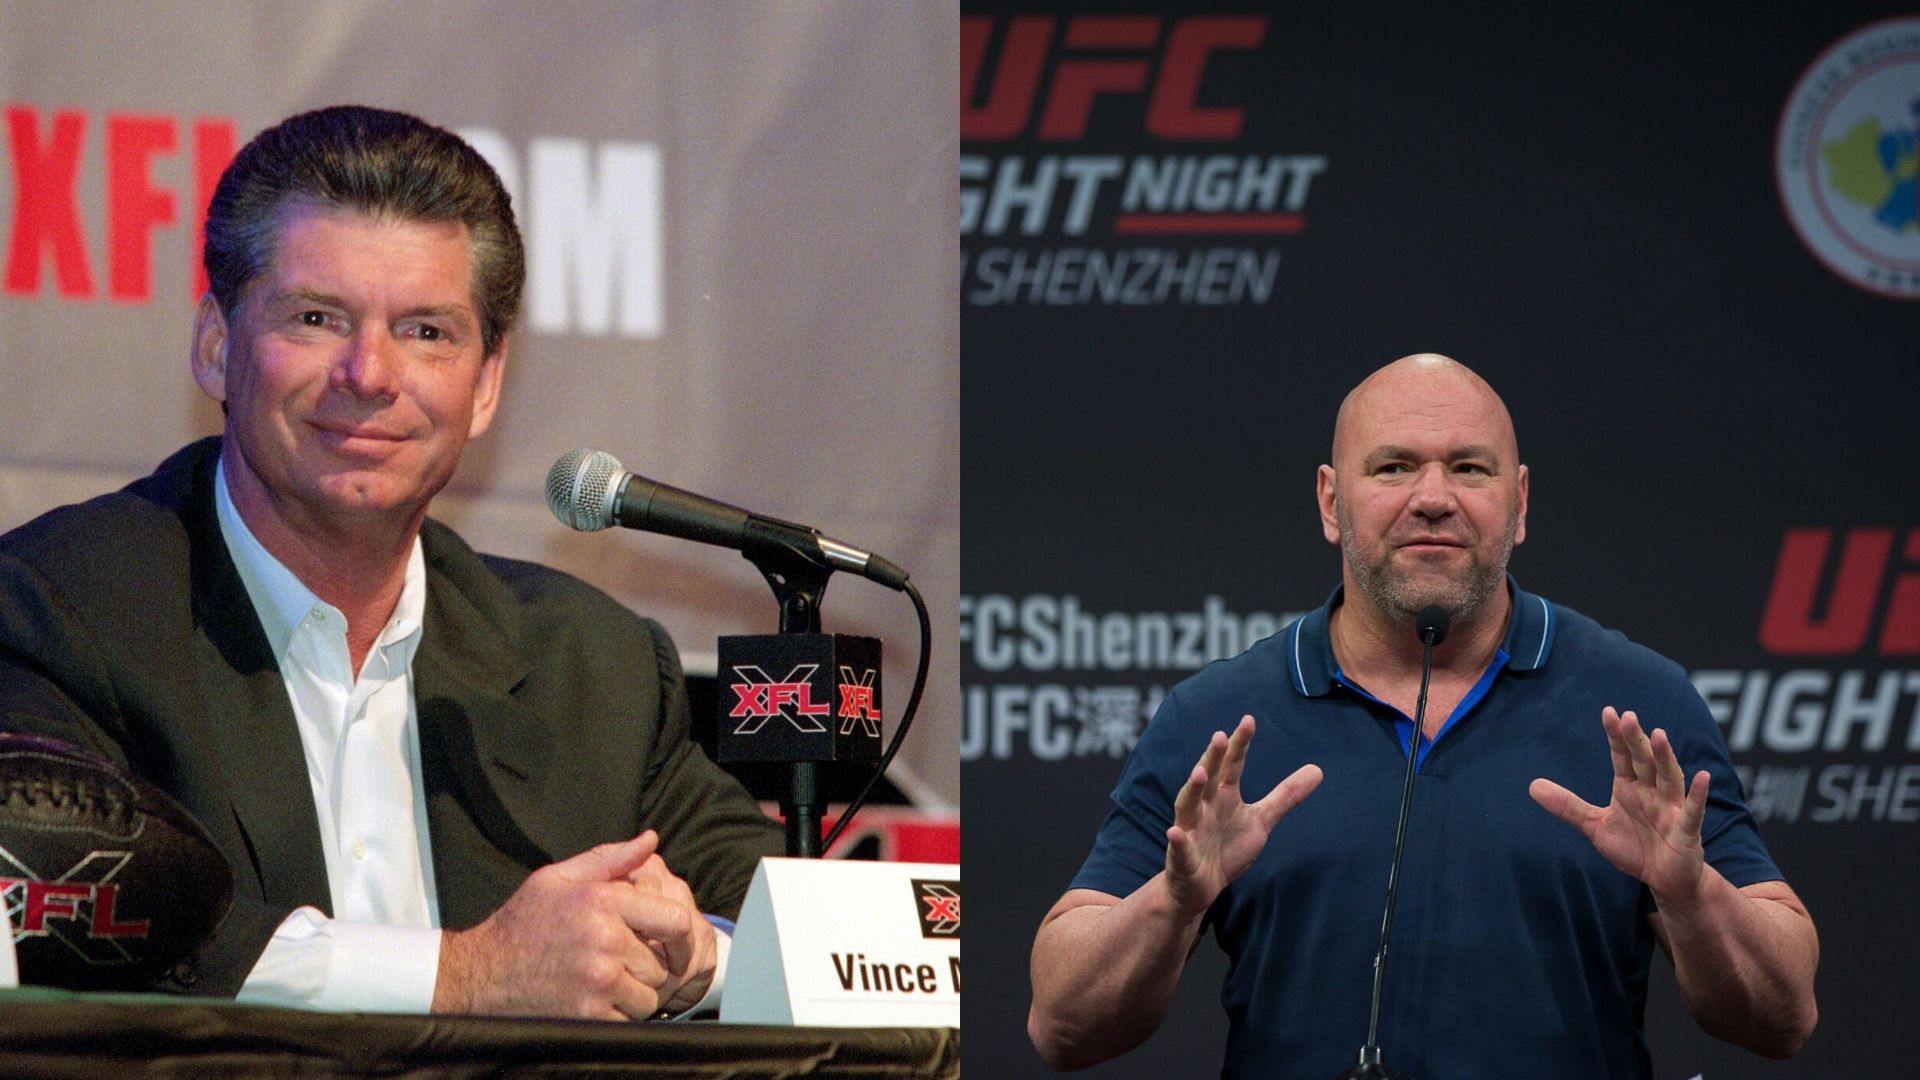 Dana White claims he is trying to find solutions to run UFC like Vince McMahon